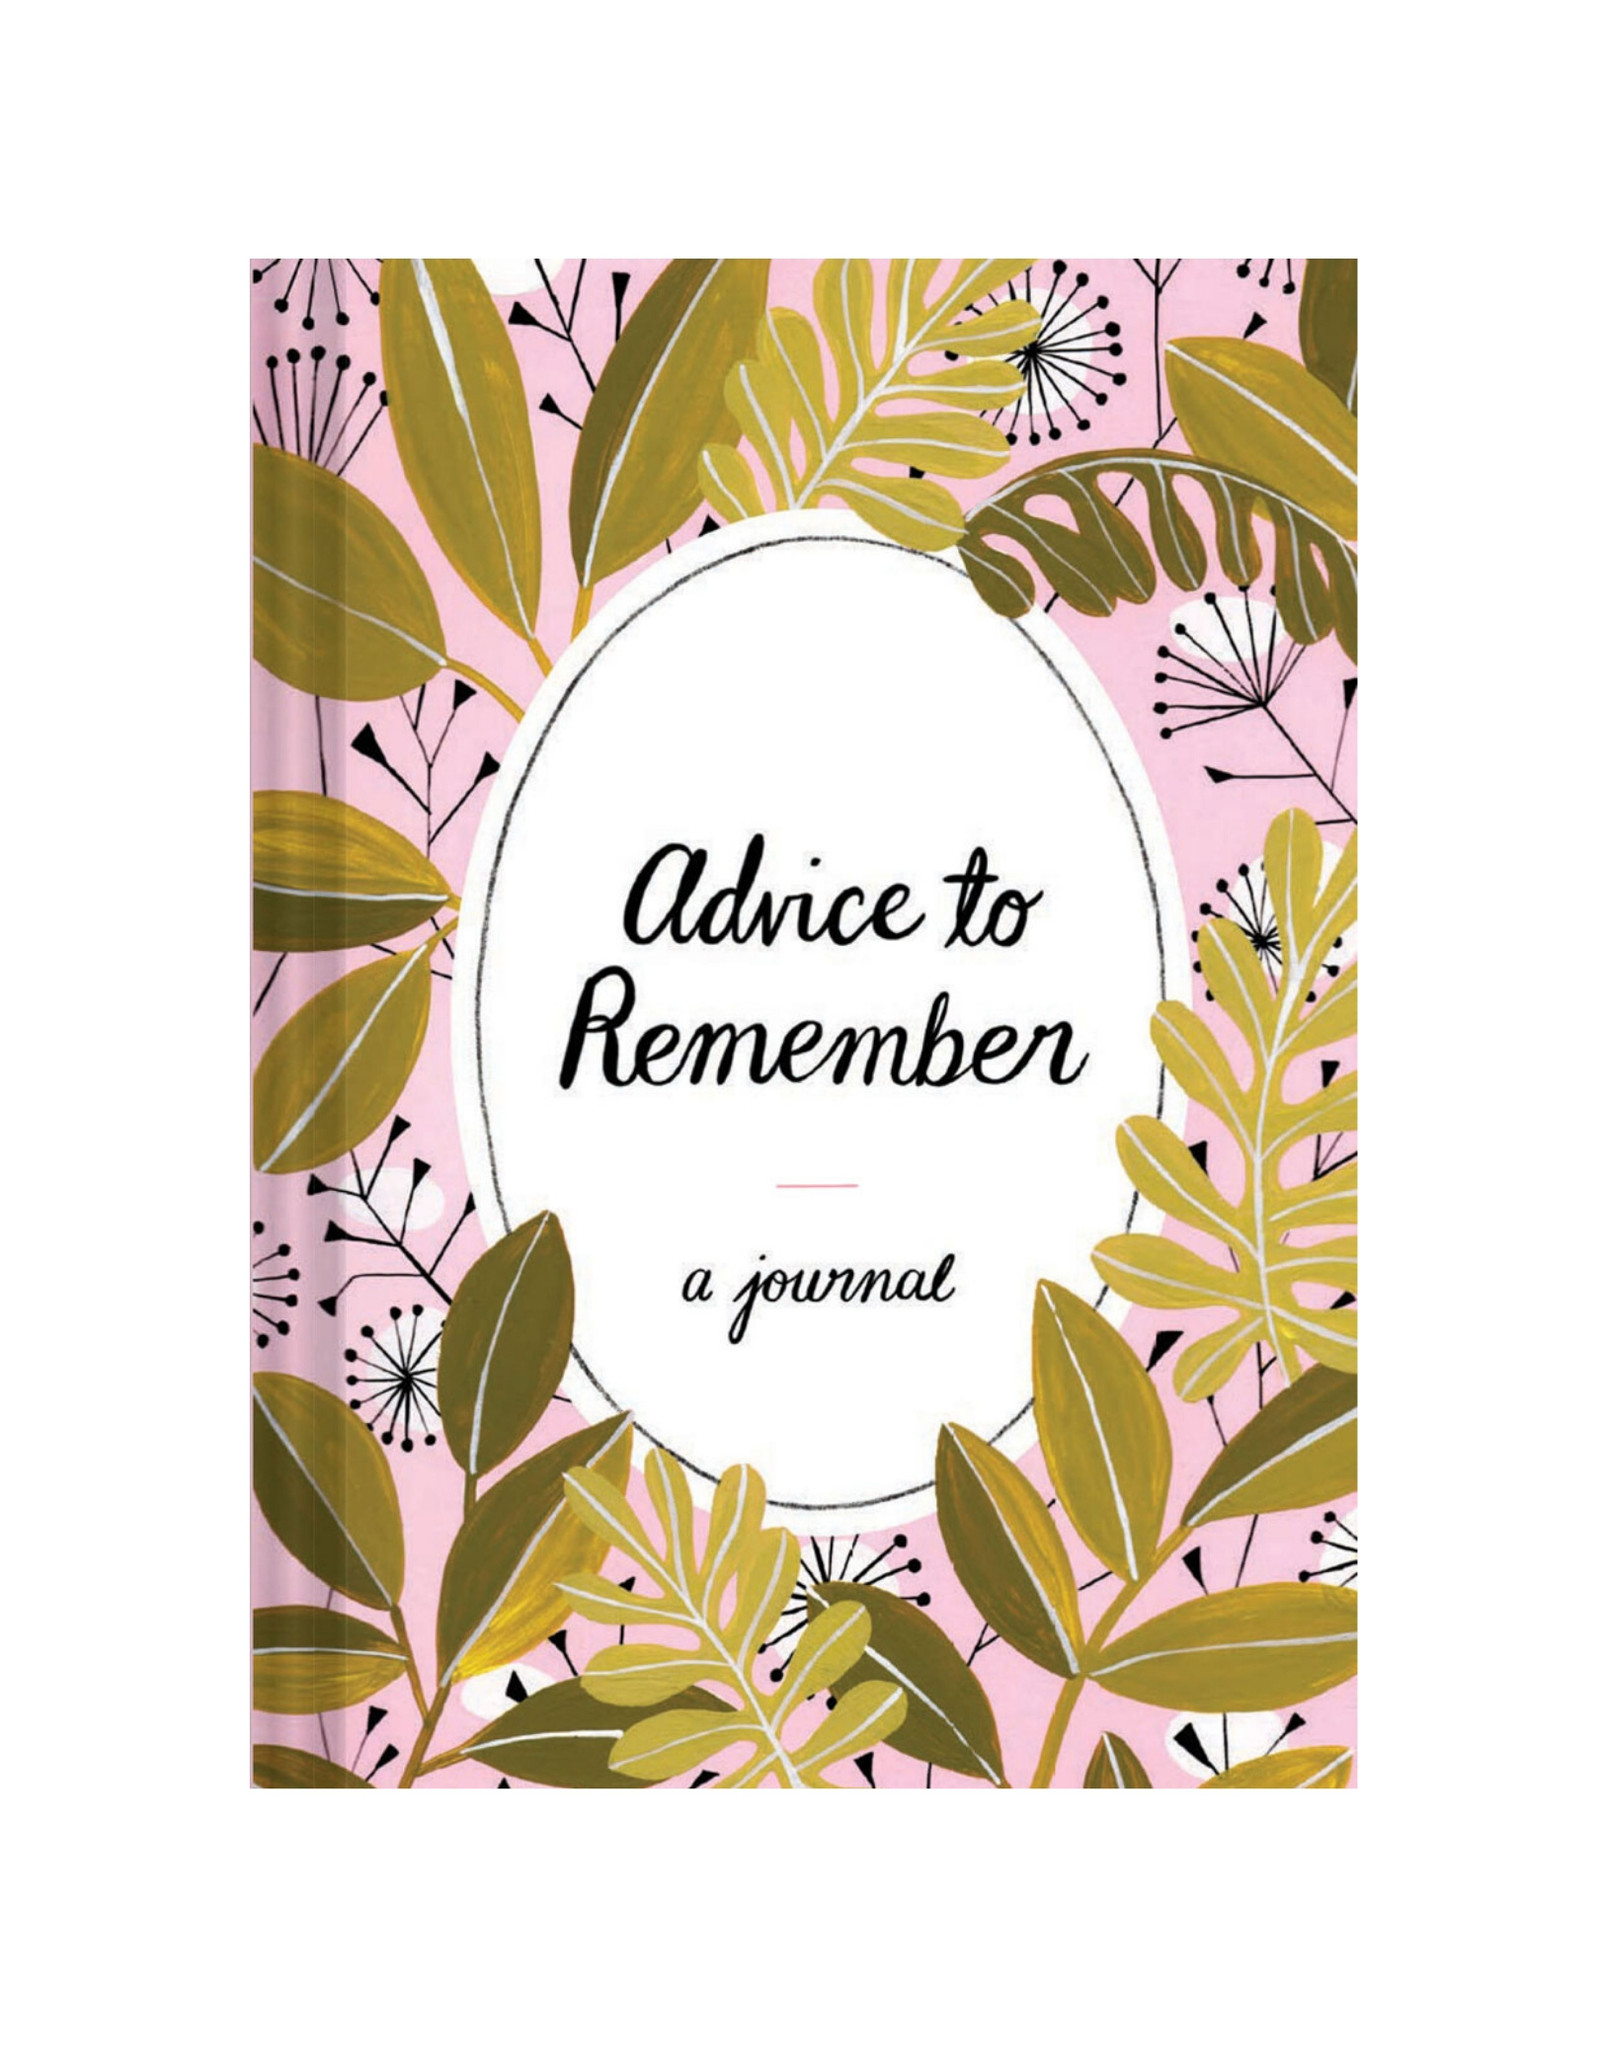 Advice to Remember - Journal